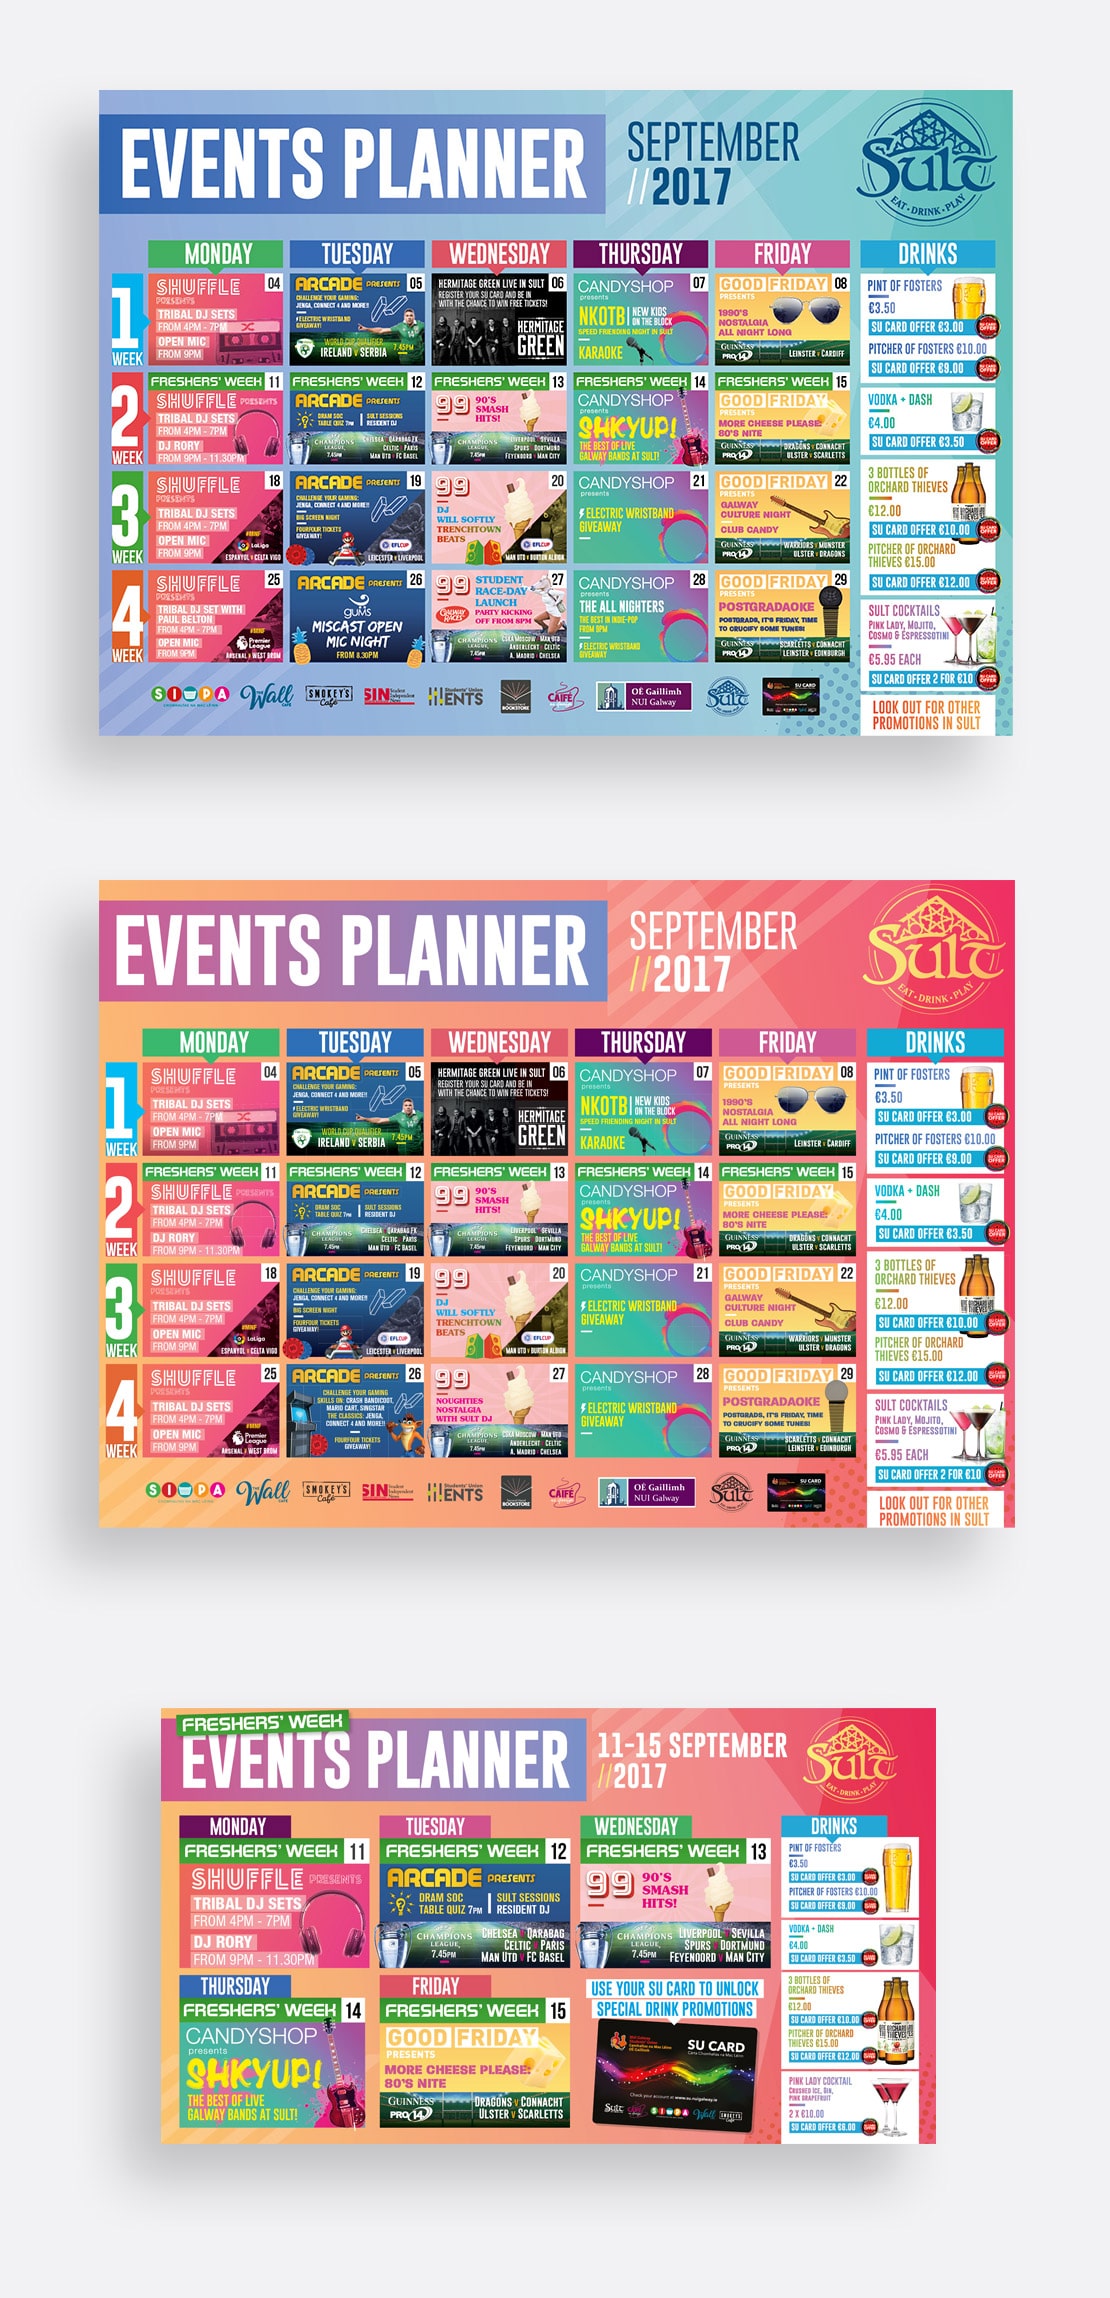 Large format events planner in print and digital formats for Sult Bar, University of Galway.